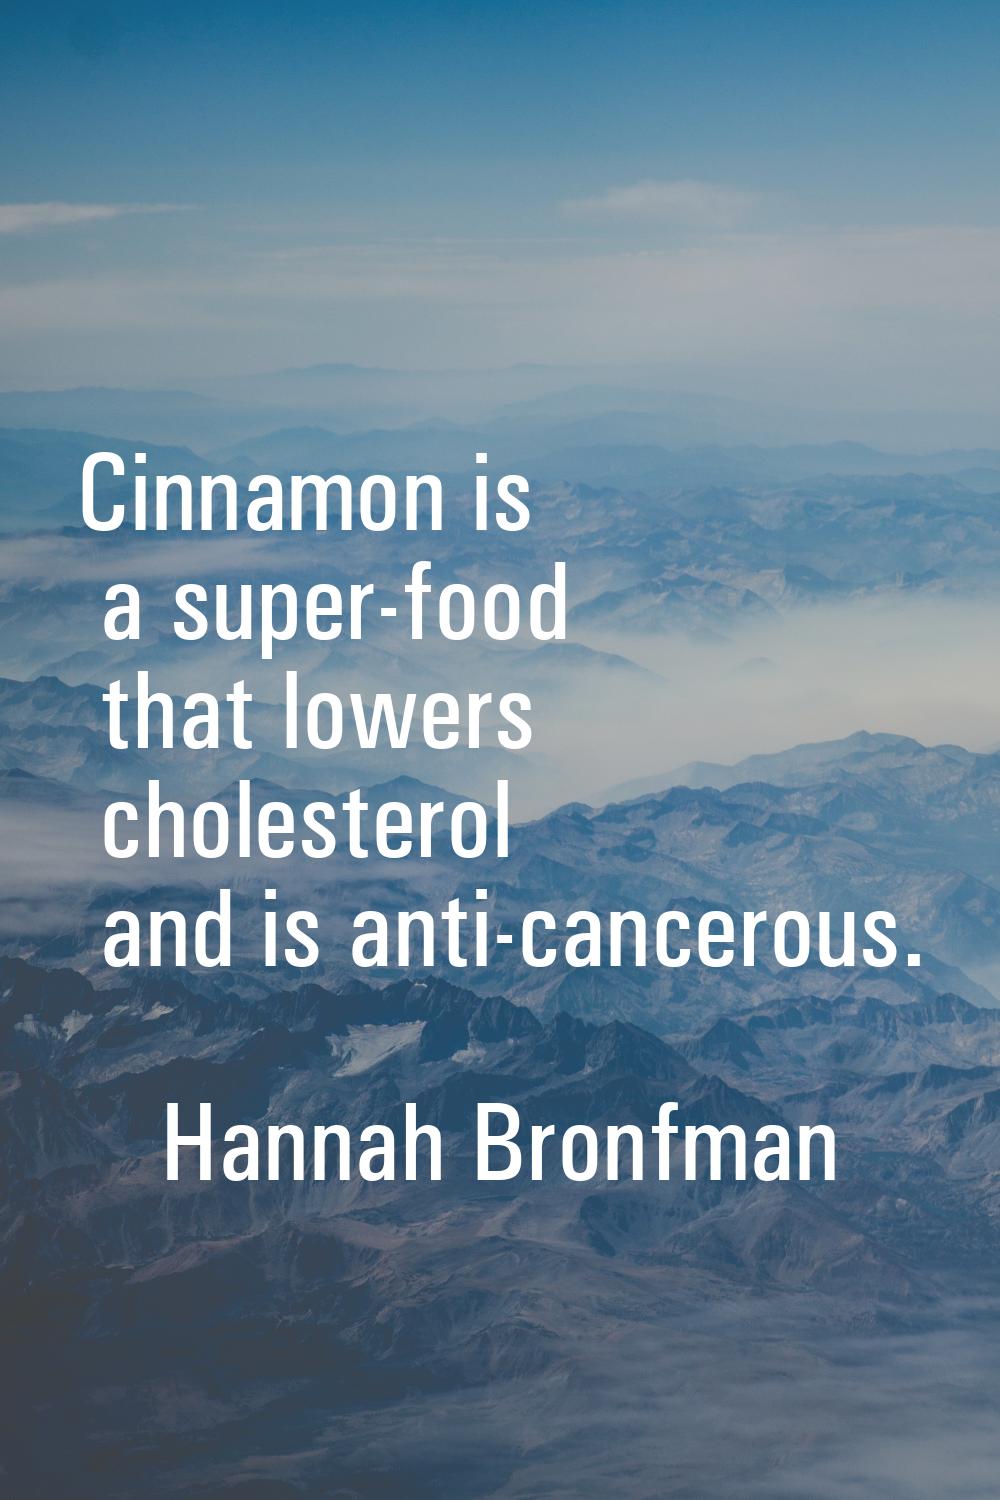 Cinnamon is a super-food that lowers cholesterol and is anti-cancerous.